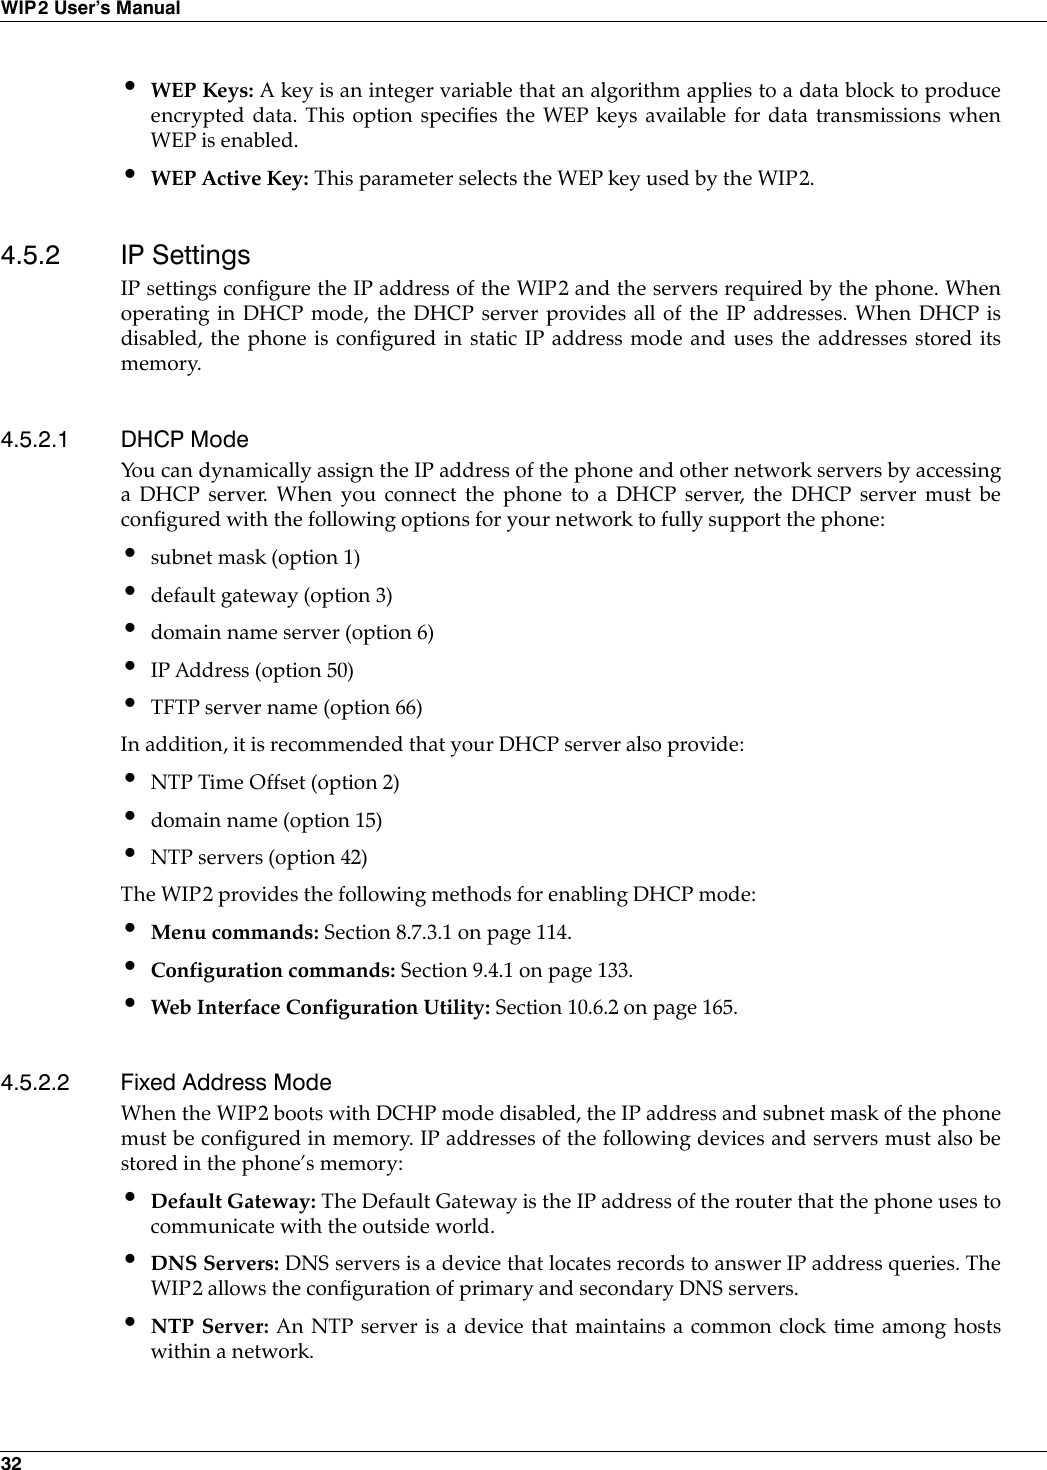 32WIP2 User’s Manual•WEP Keys: A key is an integer variable that an algorithm applies to a data block to produceencrypted data. This option specifies the WEP keys available for data transmissions whenWEP is enabled.•WEP Active Key: This parameter selects the WEP key used by the WIP2.4.5.2 IP SettingsIP settings configure the IP address of the WIP2 and the servers required by the phone. Whenoperating in DHCP mode, the DHCP server provides all of the IP addresses. When DHCP isdisabled, the phone is configured in static IP address mode and uses the addresses stored itsmemory.4.5.2.1 DHCP ModeYou can dynamically assign the IP address of the phone and other network servers by accessinga DHCP server. When you connect the phone to a DHCP server, the DHCP server must beconfigured with the following options for your network to fully support the phone:•subnet mask (option 1)•default gateway (option 3)•domain name server (option 6)•IP Address (option 50)•TFTP server name (option 66)In addition, it is recommended that your DHCP server also provide:•NTP Time Offset (option 2)•domain name (option 15)•NTP servers (option 42)The WIP2 provides the following methods for enabling DHCP mode:•Menu commands: Section 8.7.3.1 on page 114.•Configuration commands: Section 9.4.1 on page 133.•Web Interface Configuration Utility: Section 10.6.2 on page 165.4.5.2.2 Fixed Address ModeWhen the WIP2 boots with DCHP mode disabled, the IP address and subnet mask of the phonemust be configured in memory. IP addresses of the following devices and servers must also bestored in the phone’s memory:•Default Gateway: The Default Gateway is the IP address of the router that the phone uses tocommunicate with the outside world.•DNS Servers: DNS servers is a device that locates records to answer IP address queries. TheWIP2 allows the configuration of primary and secondary DNS servers.•NTP Server: An NTP server is a device that maintains a common clock time among hostswithin a network.